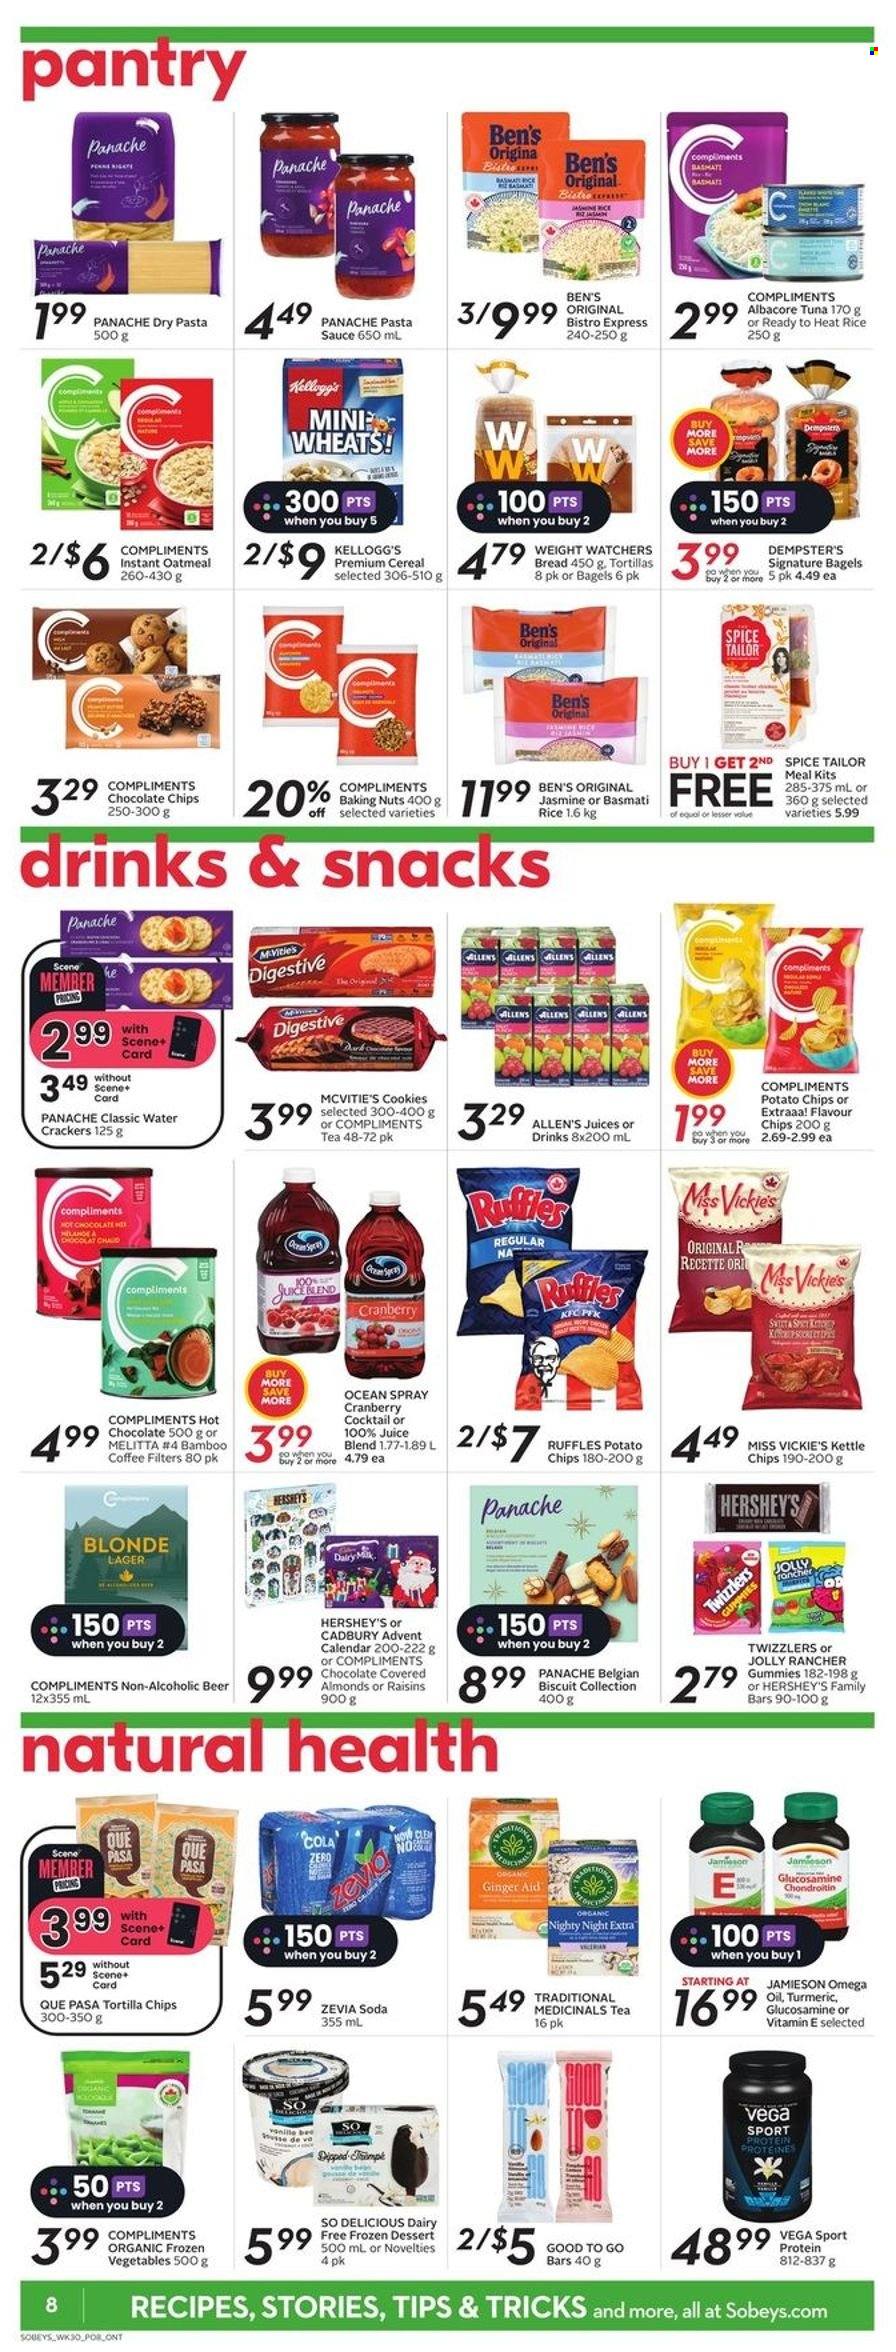 thumbnail - Sobeys Flyer - November 24, 2022 - November 30, 2022 - Sales products - bagels, bread, ginger, tuna, pasta sauce, sauce, advent calendar, Hershey's, frozen vegetables, cookies, crackers, Kellogg's, biscuit, Cadbury, tortilla chips, potato chips, Ruffles, oatmeal, cereals, basmati rice, rice, turmeric, spice, oil, almonds, juice, Coca-Cola zero, soda, hot chocolate, tea, beer, Lager, glucosamine. Page 10.